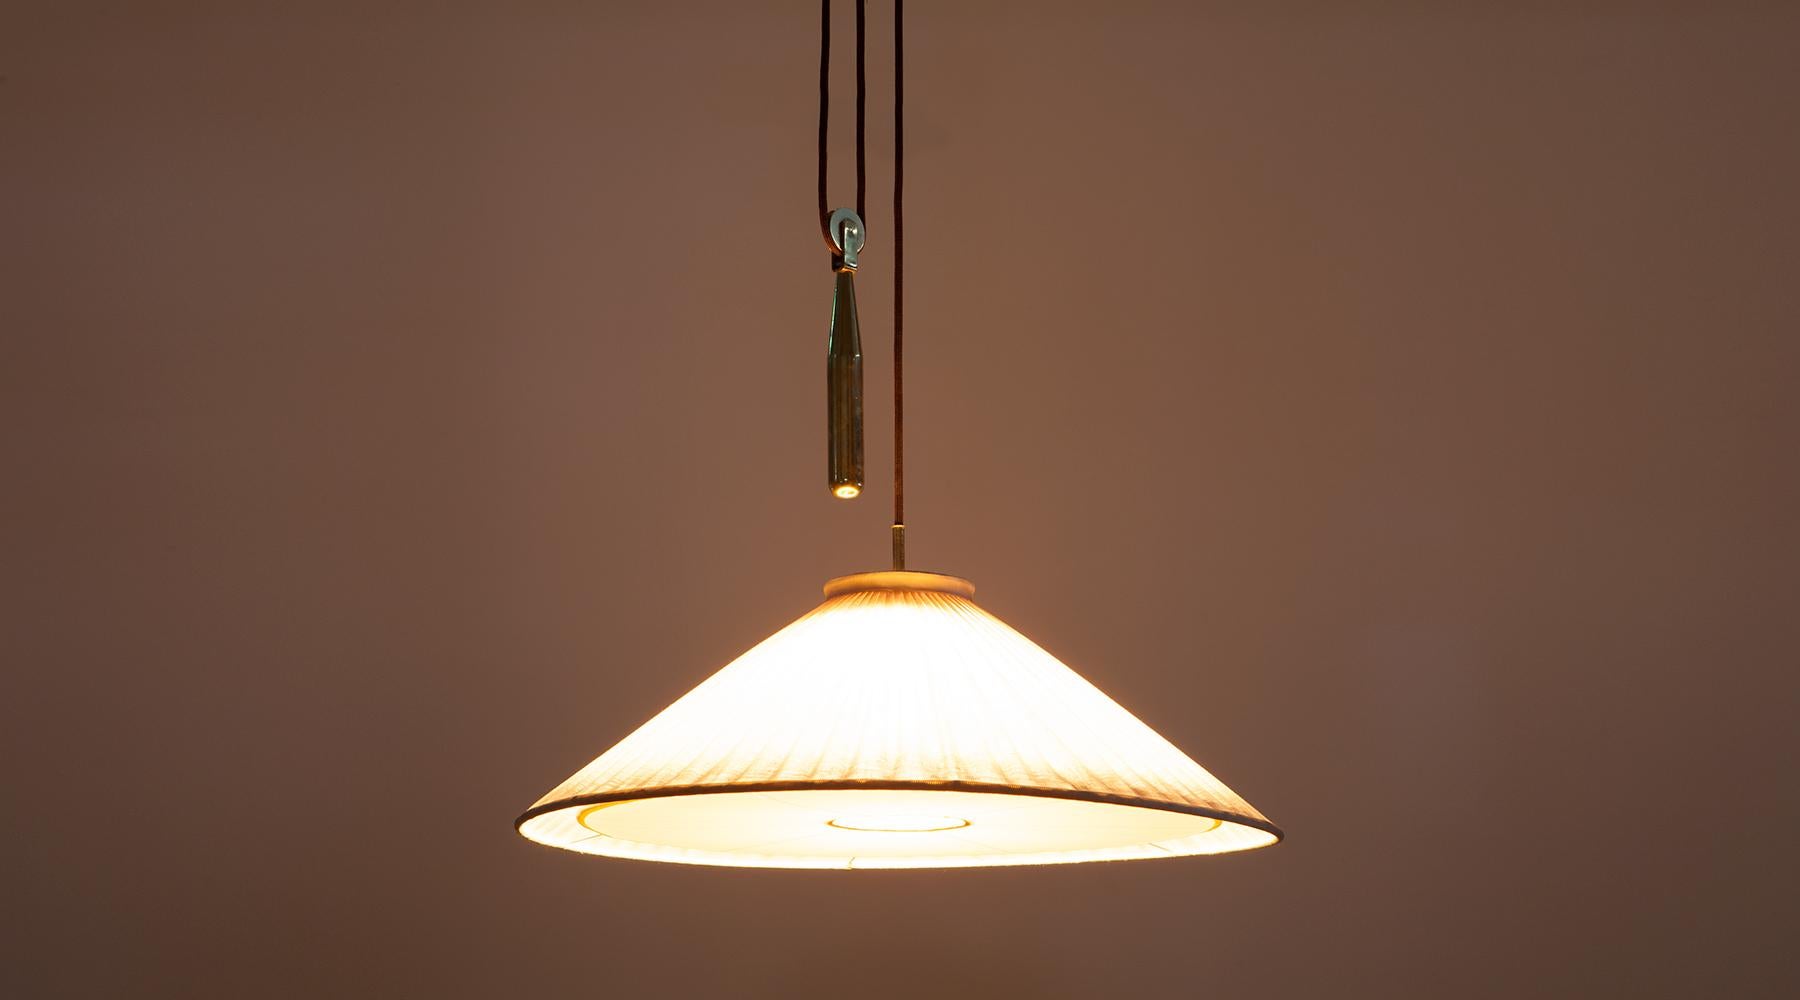 Fabric and brass, ceiling lamp by Paavo Tynell, Finland, 1952.

Plain, beautiful ceiling lamp by Finland Classic Paavo Tynell. Its light creates an inviting atmosphere through the fabric shade and is matched by brass elements. The height is